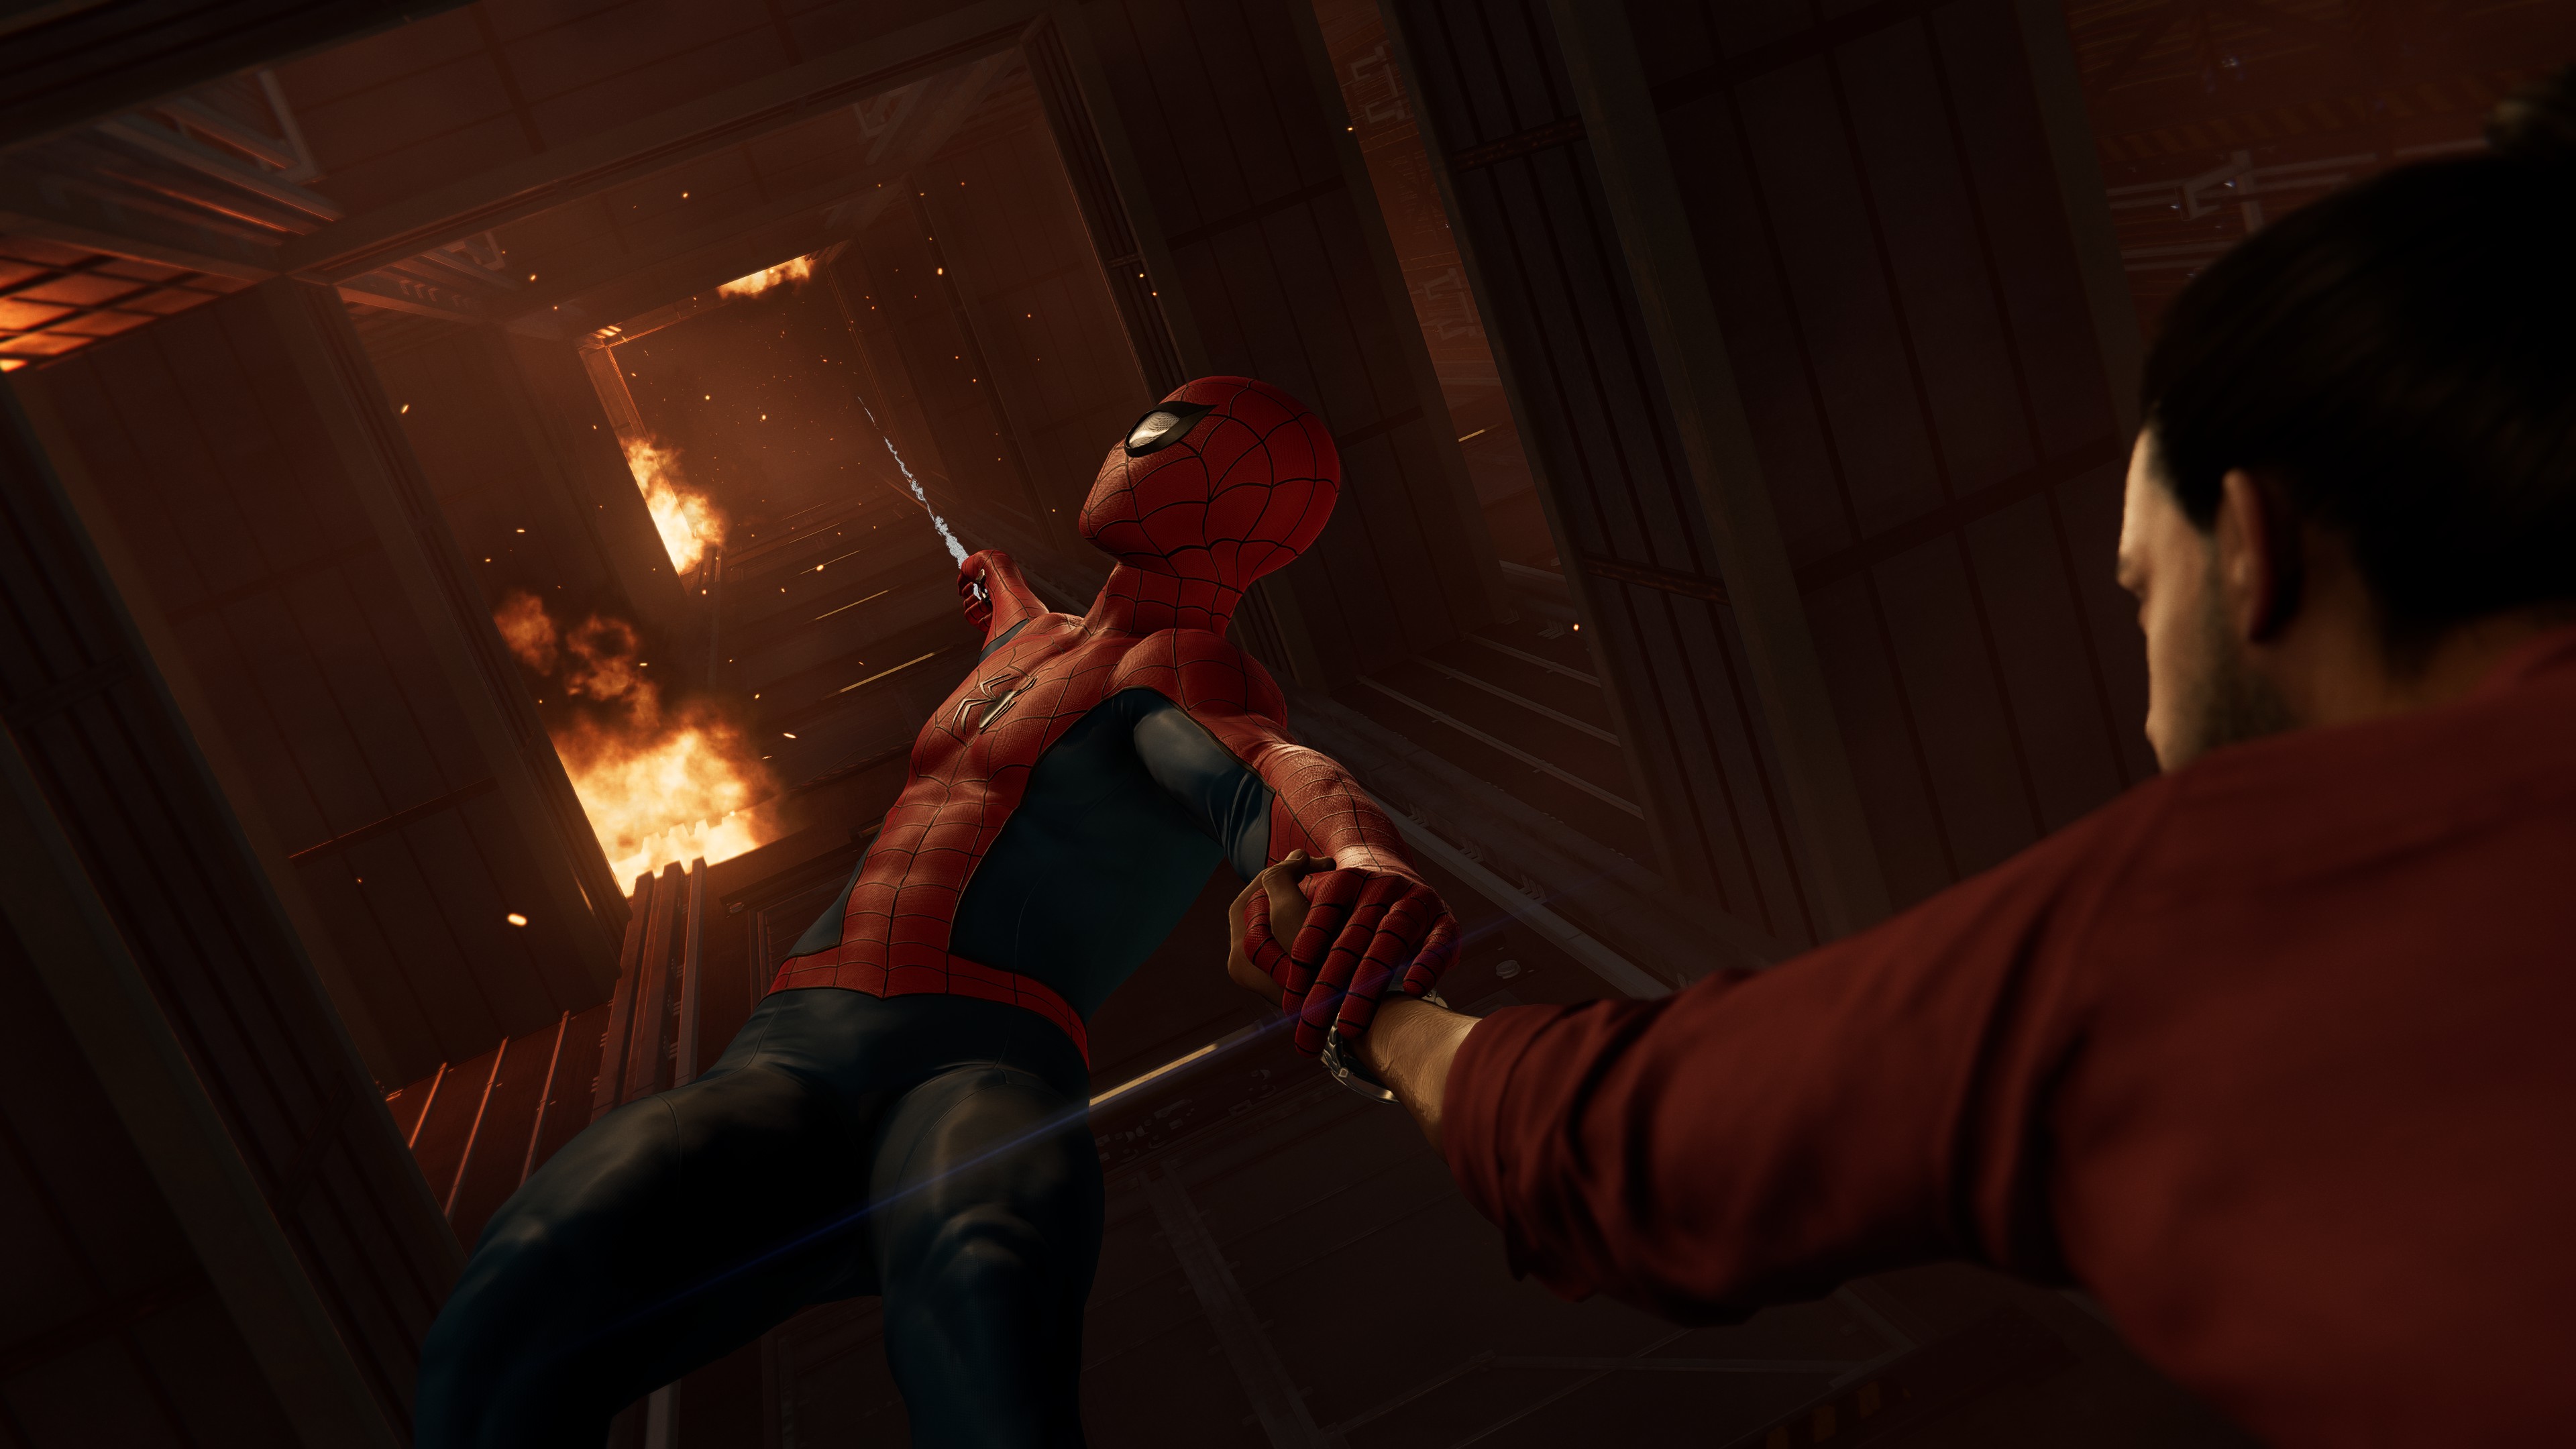 Spider-Man saving someone from a burning building